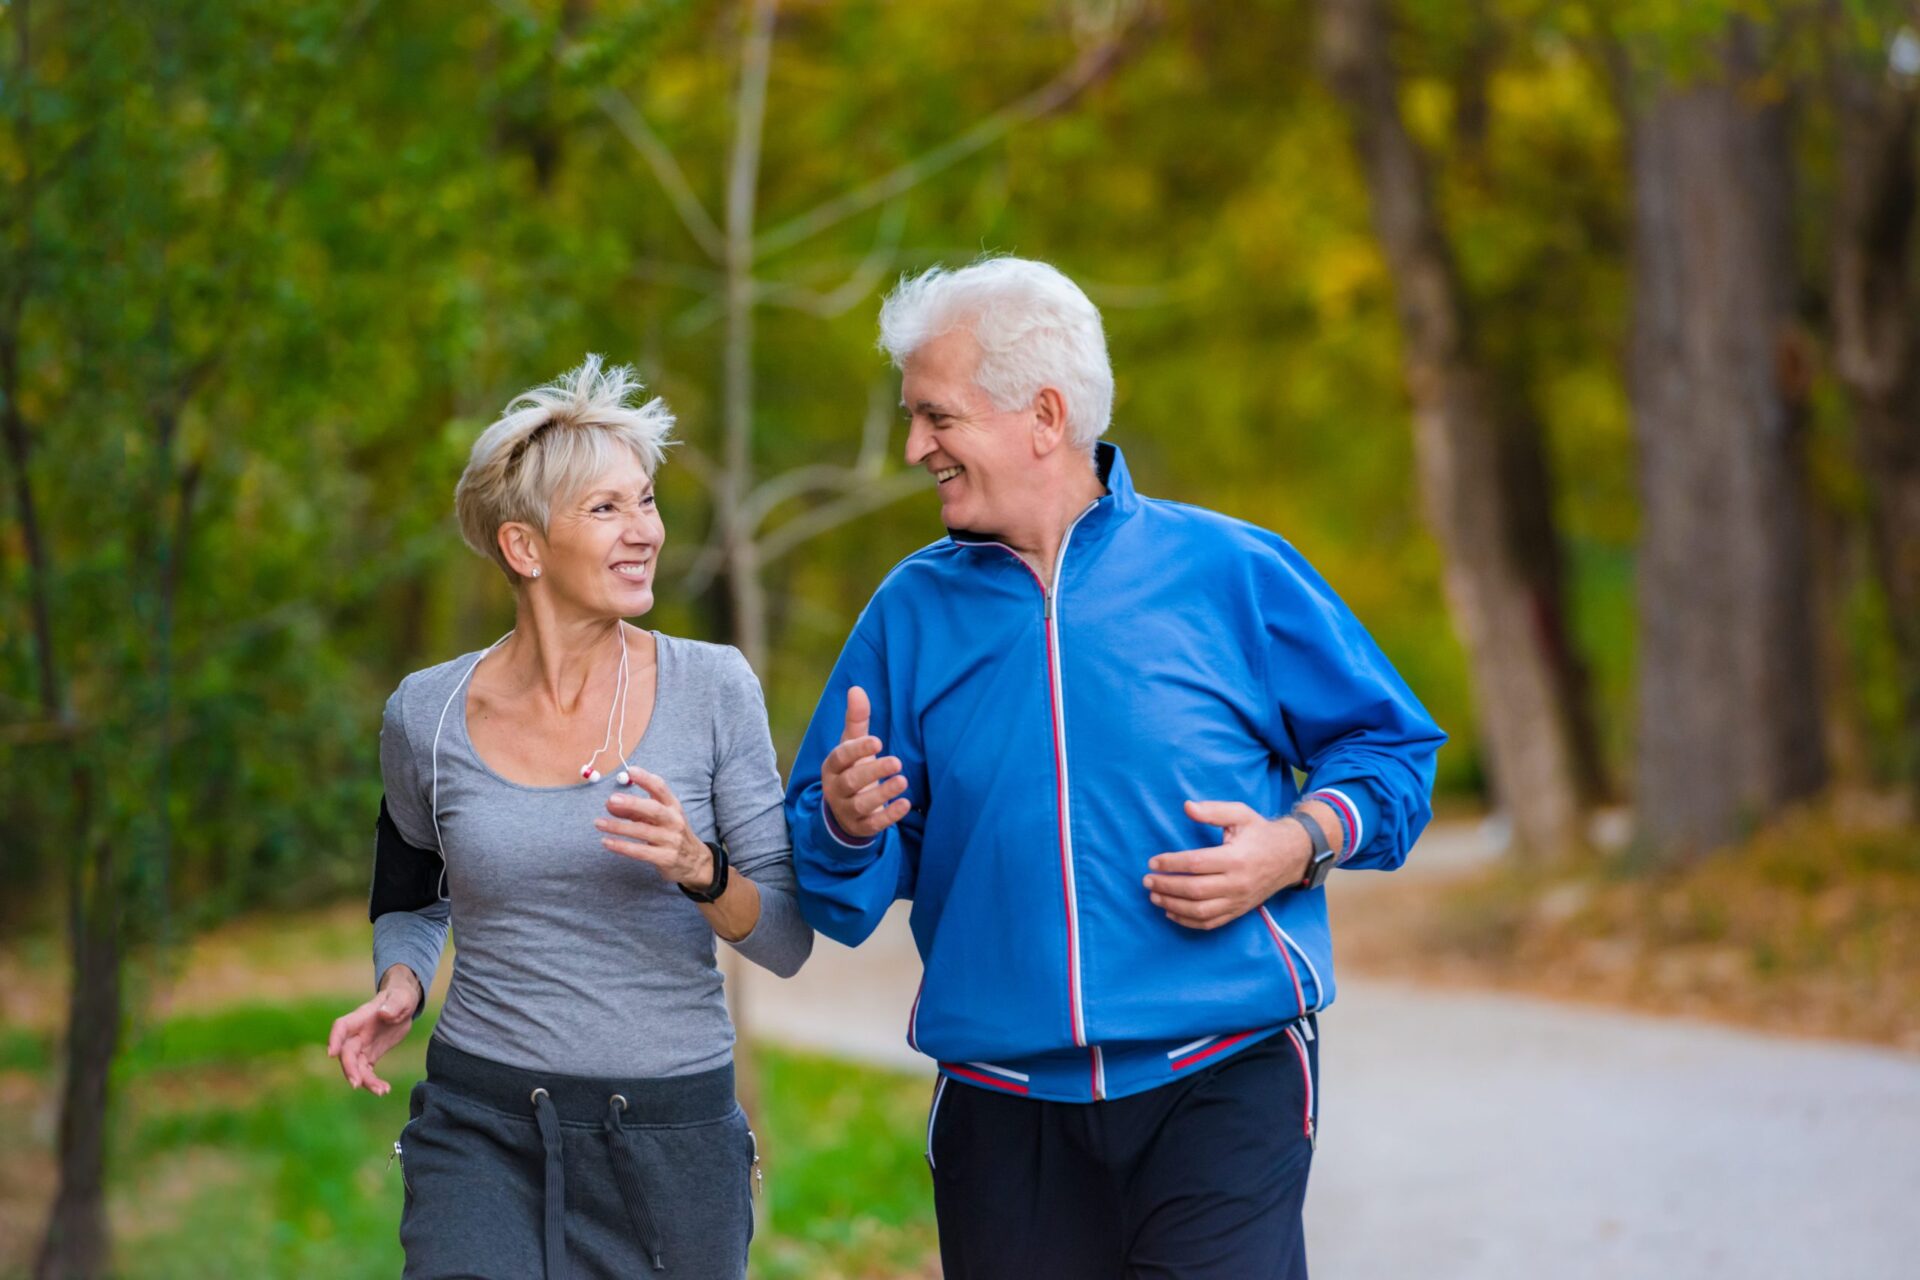 An elderly man and woman smile at each other while they're out for a jog at a park